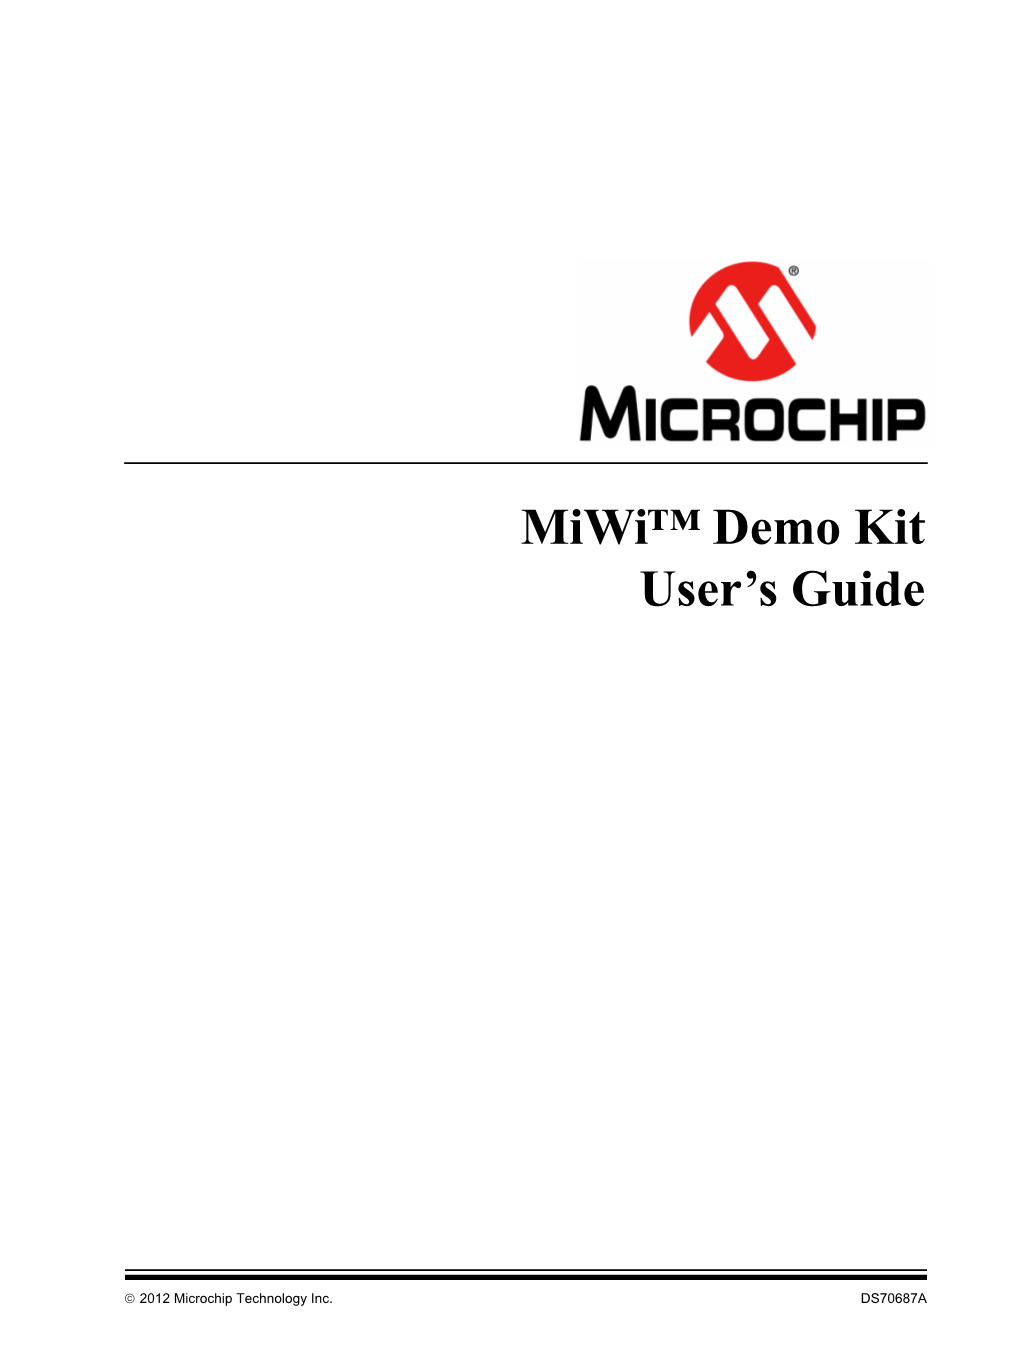 Miwi Demo Kit User's Guide